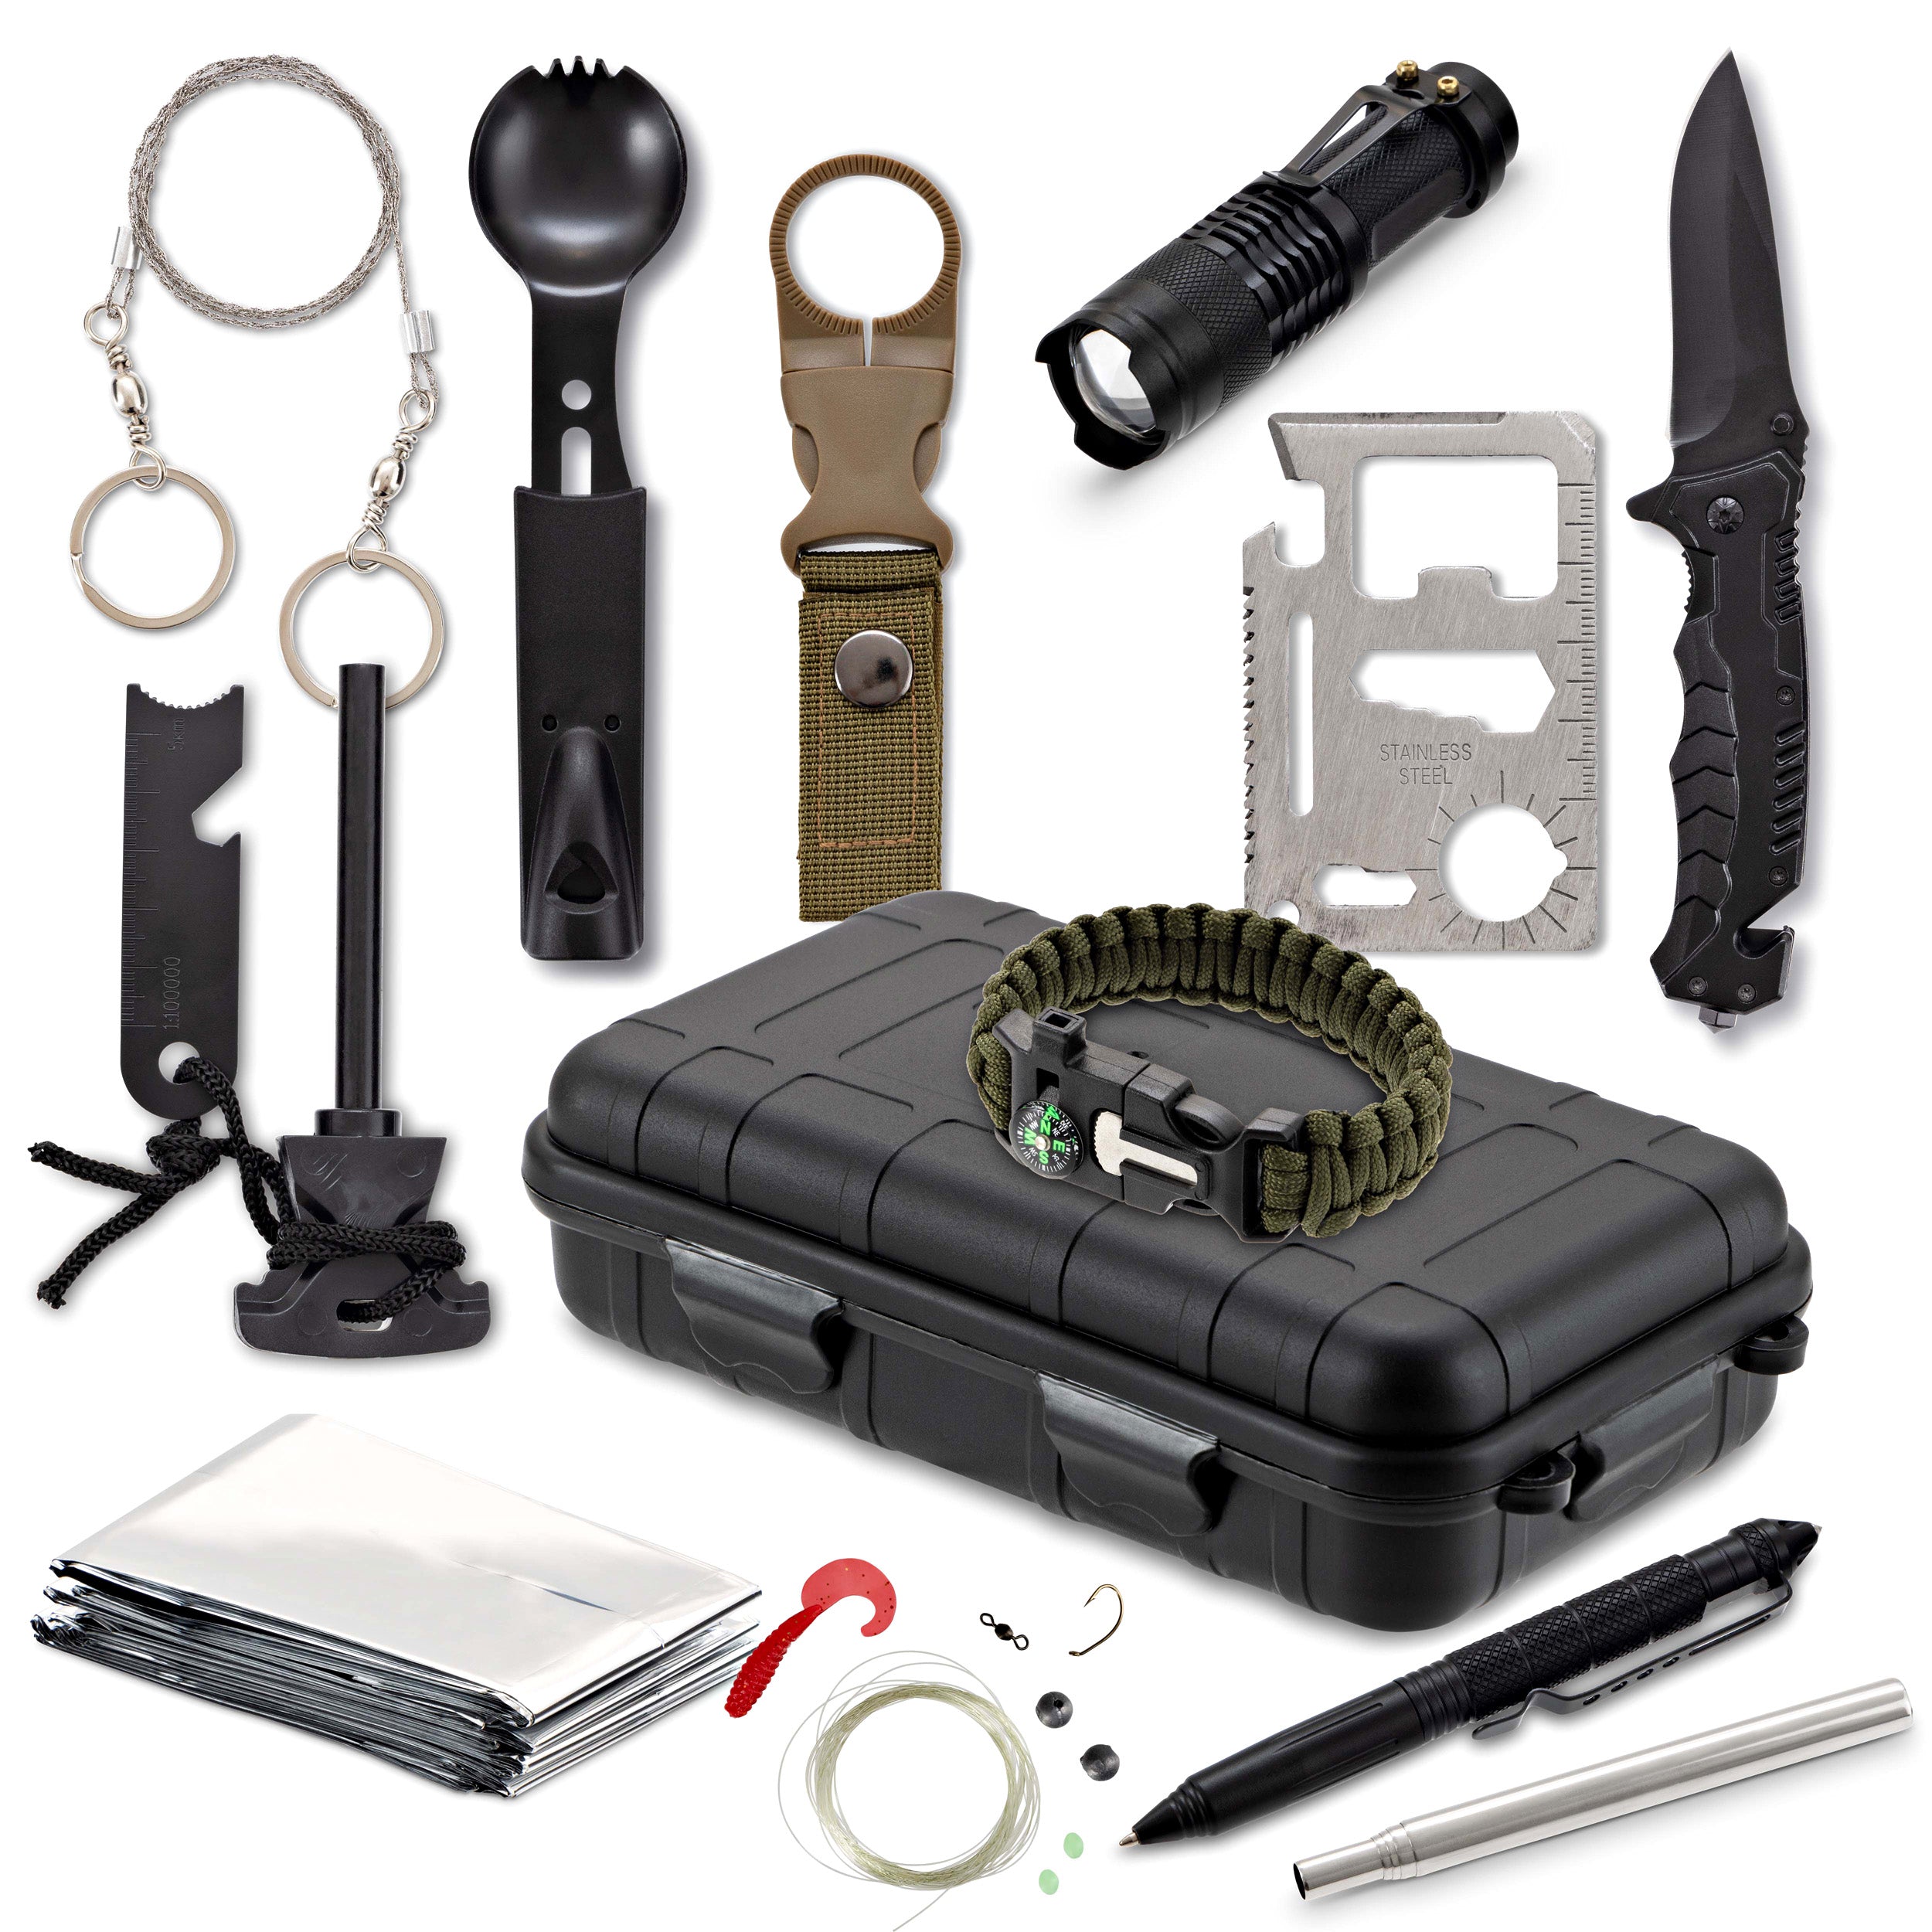 FOSCO - Combat Survival Kit Waterproof - 14 Elements - 469486 BK best price, check availability, buy online with